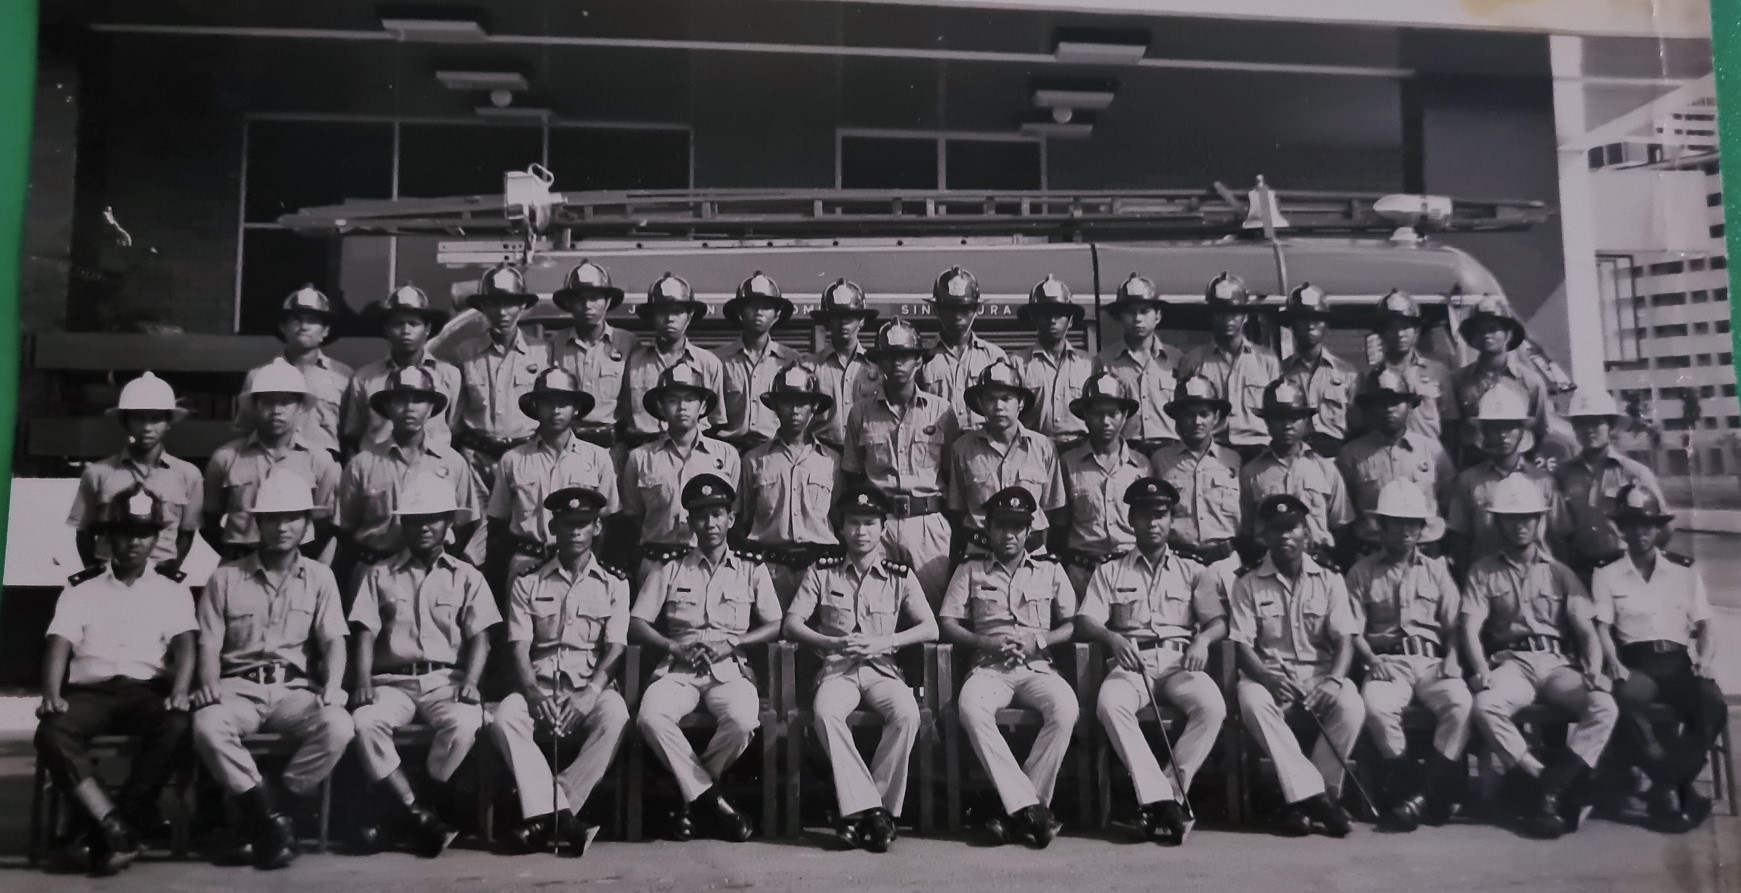 Recruit Md Salleh (second row, fourth person from the left) joined the Singapore Fire Brigade in 1975.